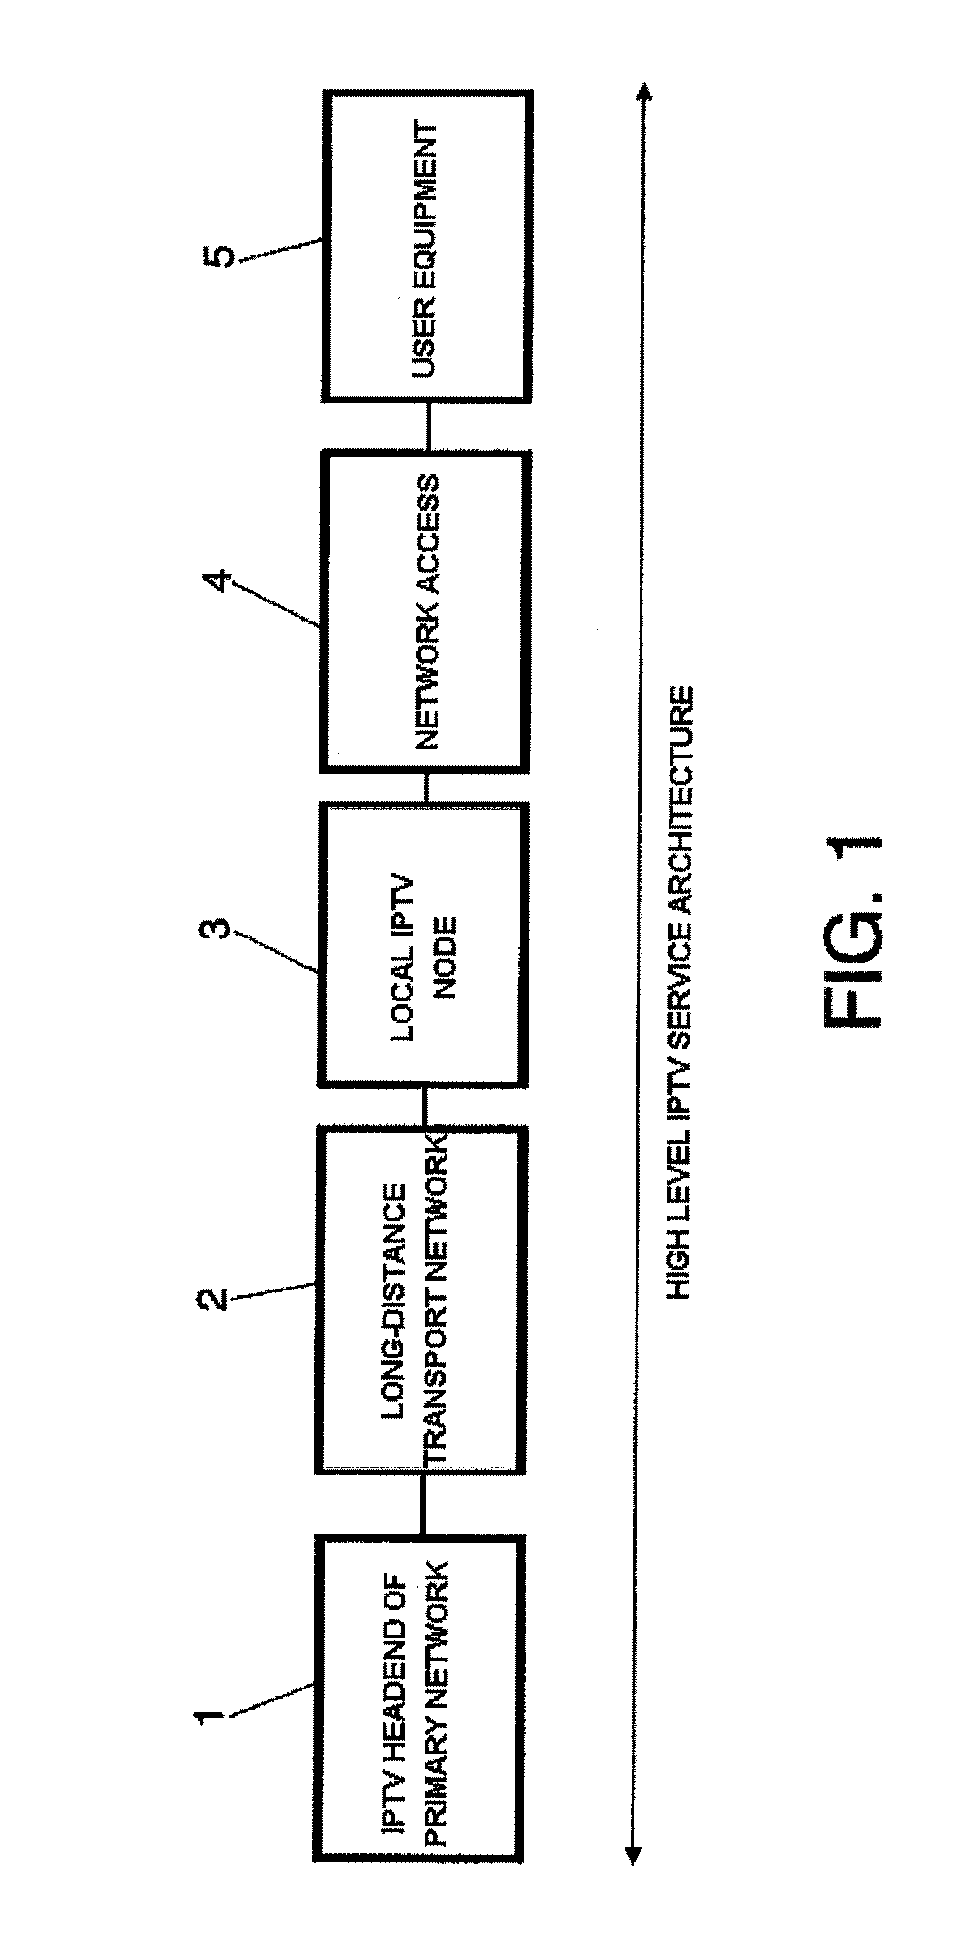 System and method for distributing digital signals over long-distance switched optical transport networks